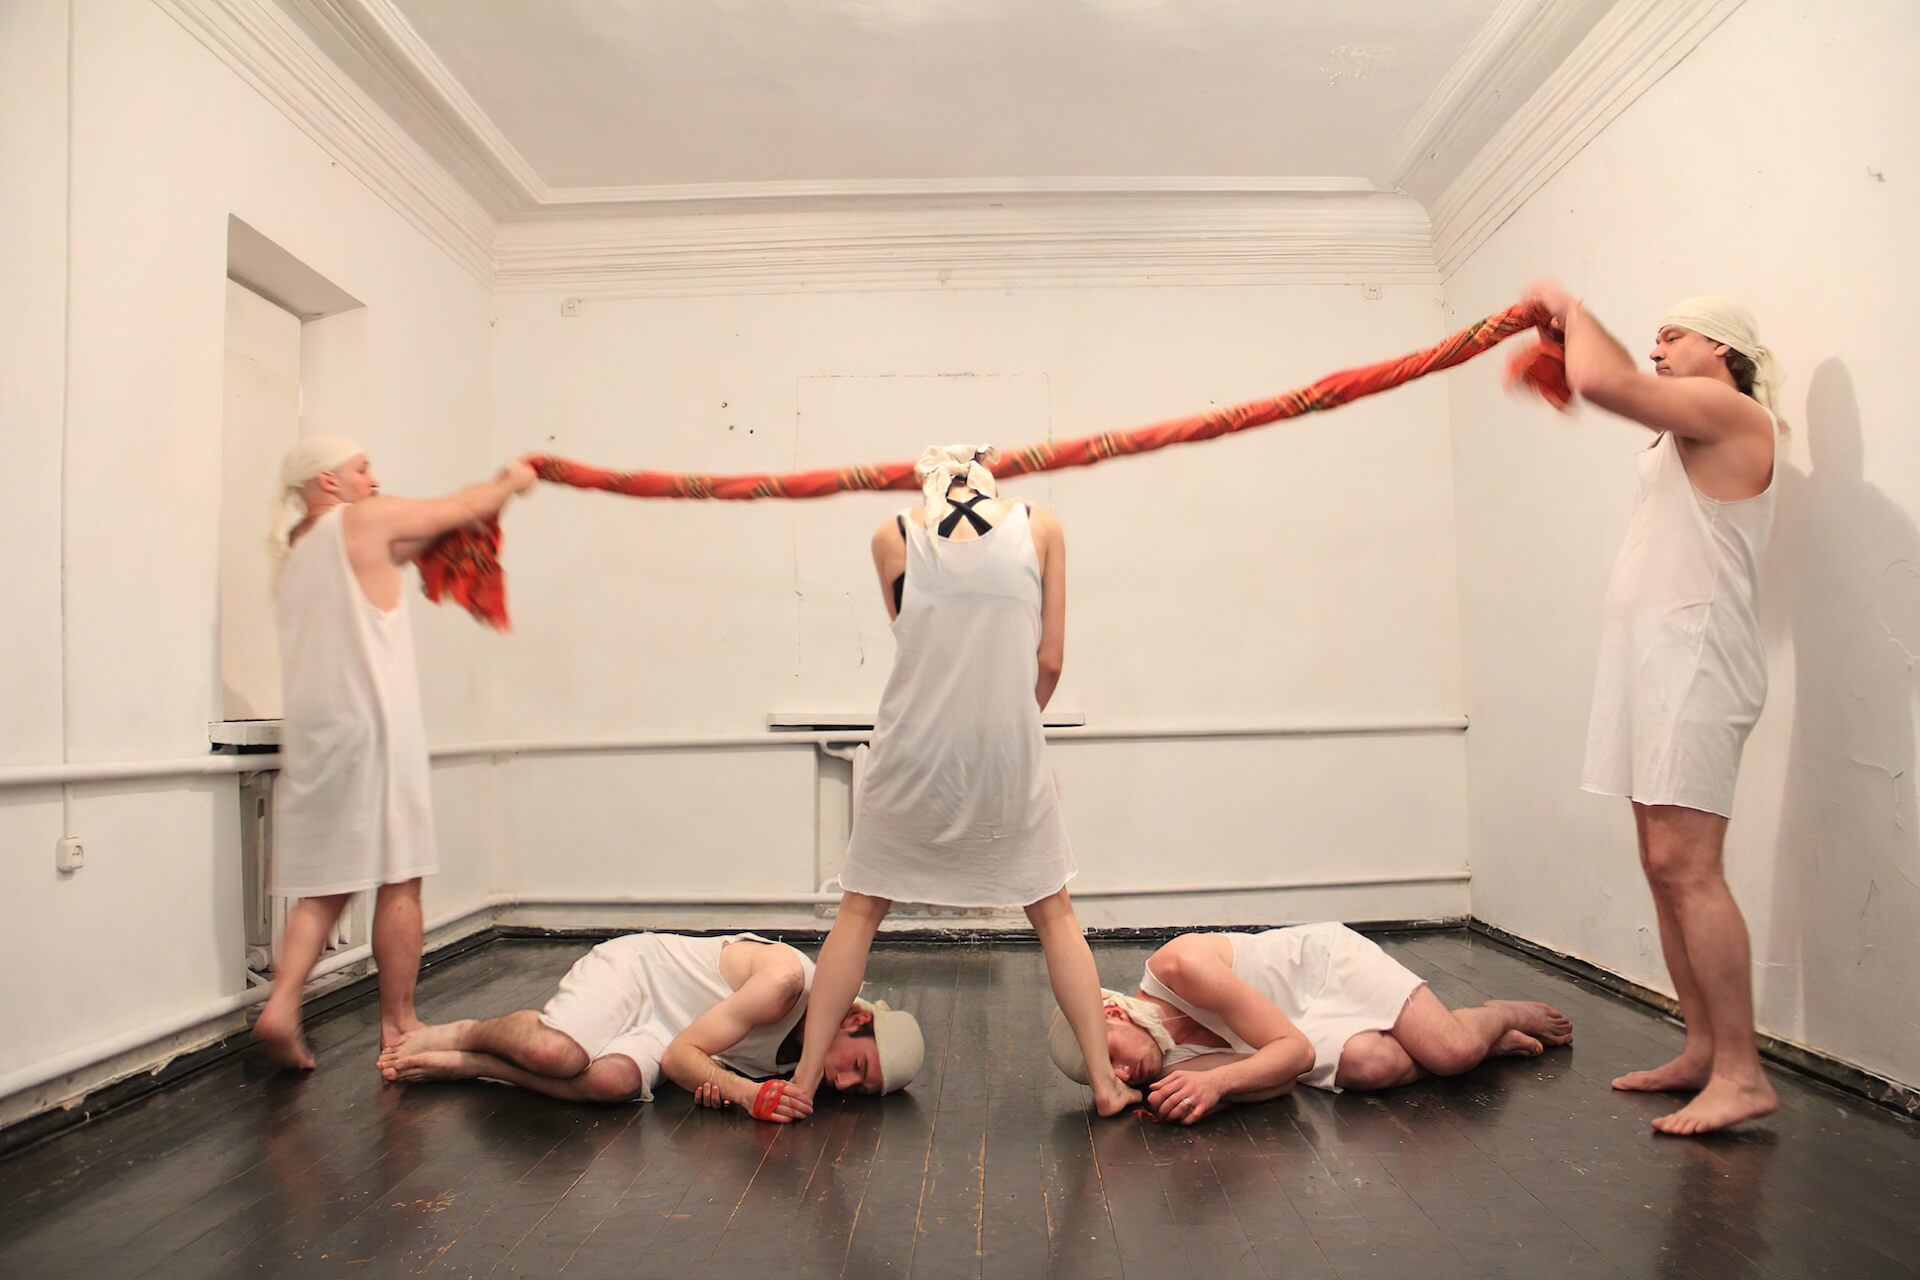 Two performers are standing holding each end of a blanket wrapped around like a rope. In the middle stands a performer and two other performers lying on the floor holding each foot of the performer standing in the middle.